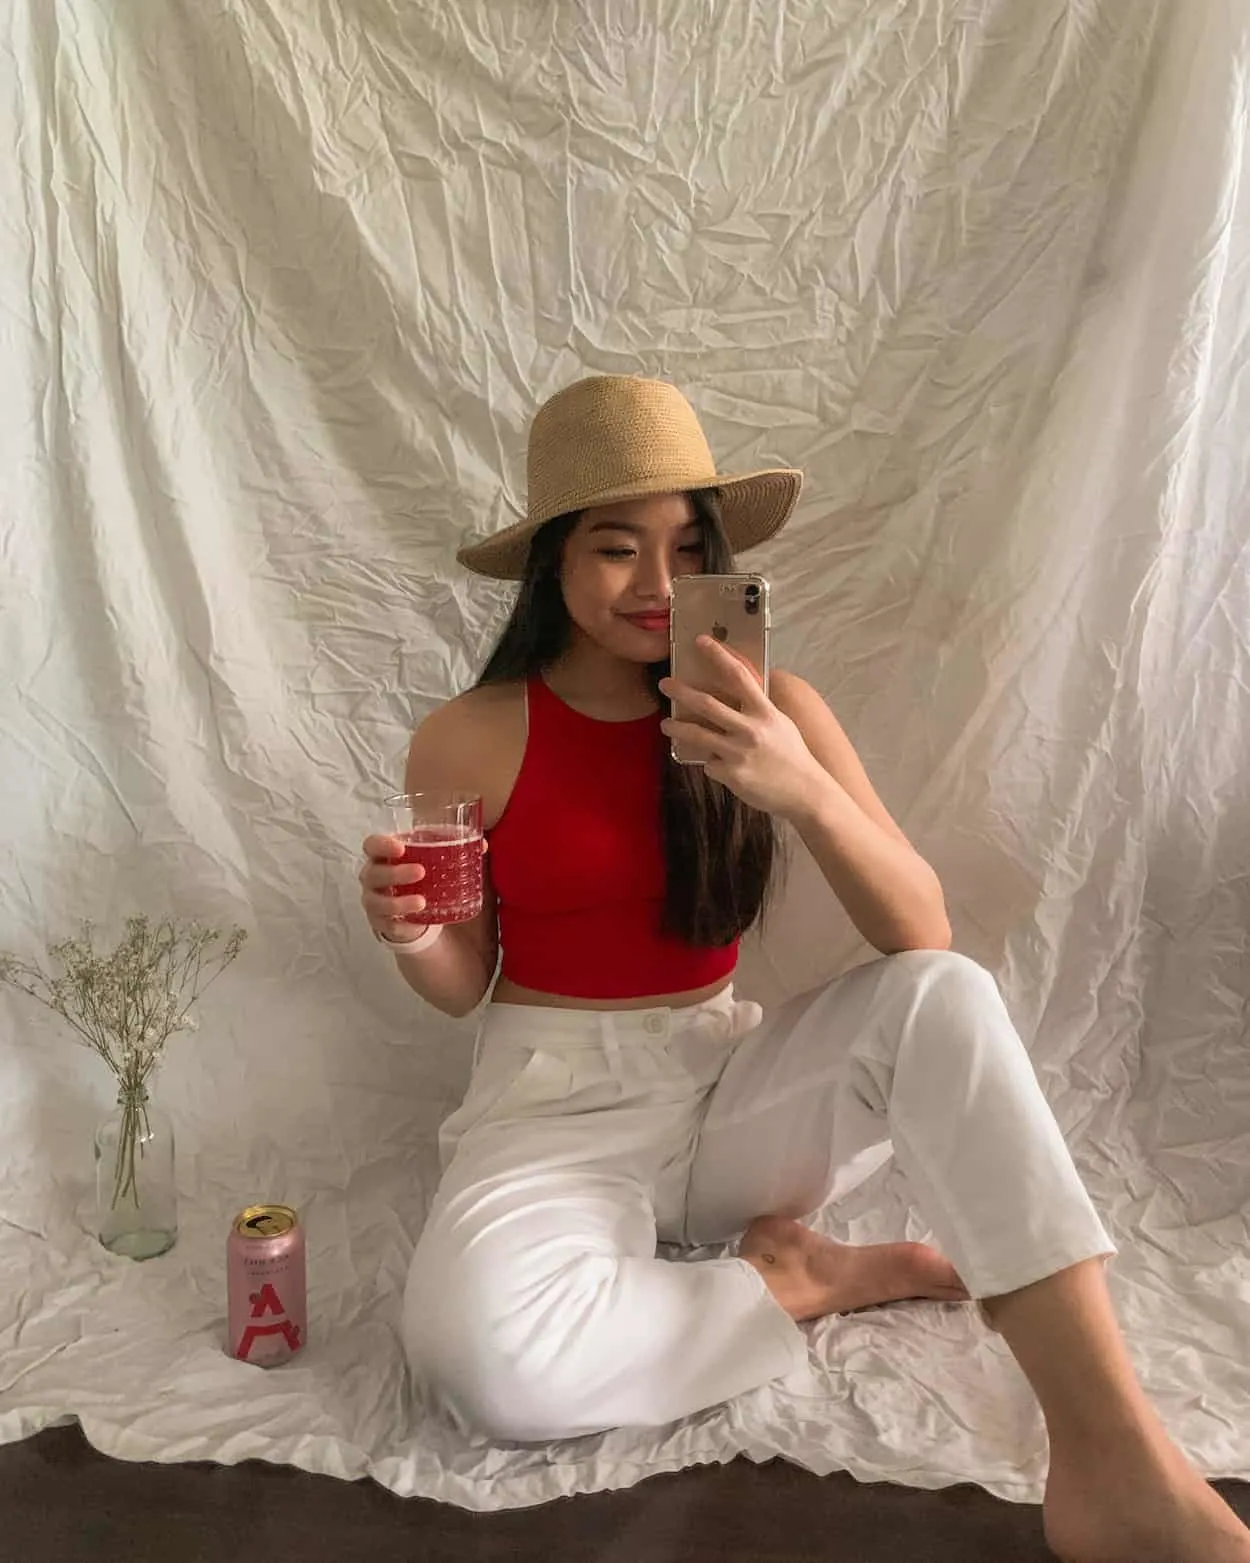 Drinking Ace Hill vodka soda while wearing Aritzia straw hat, American Apparel red crop top, and Levi's white balloon pants